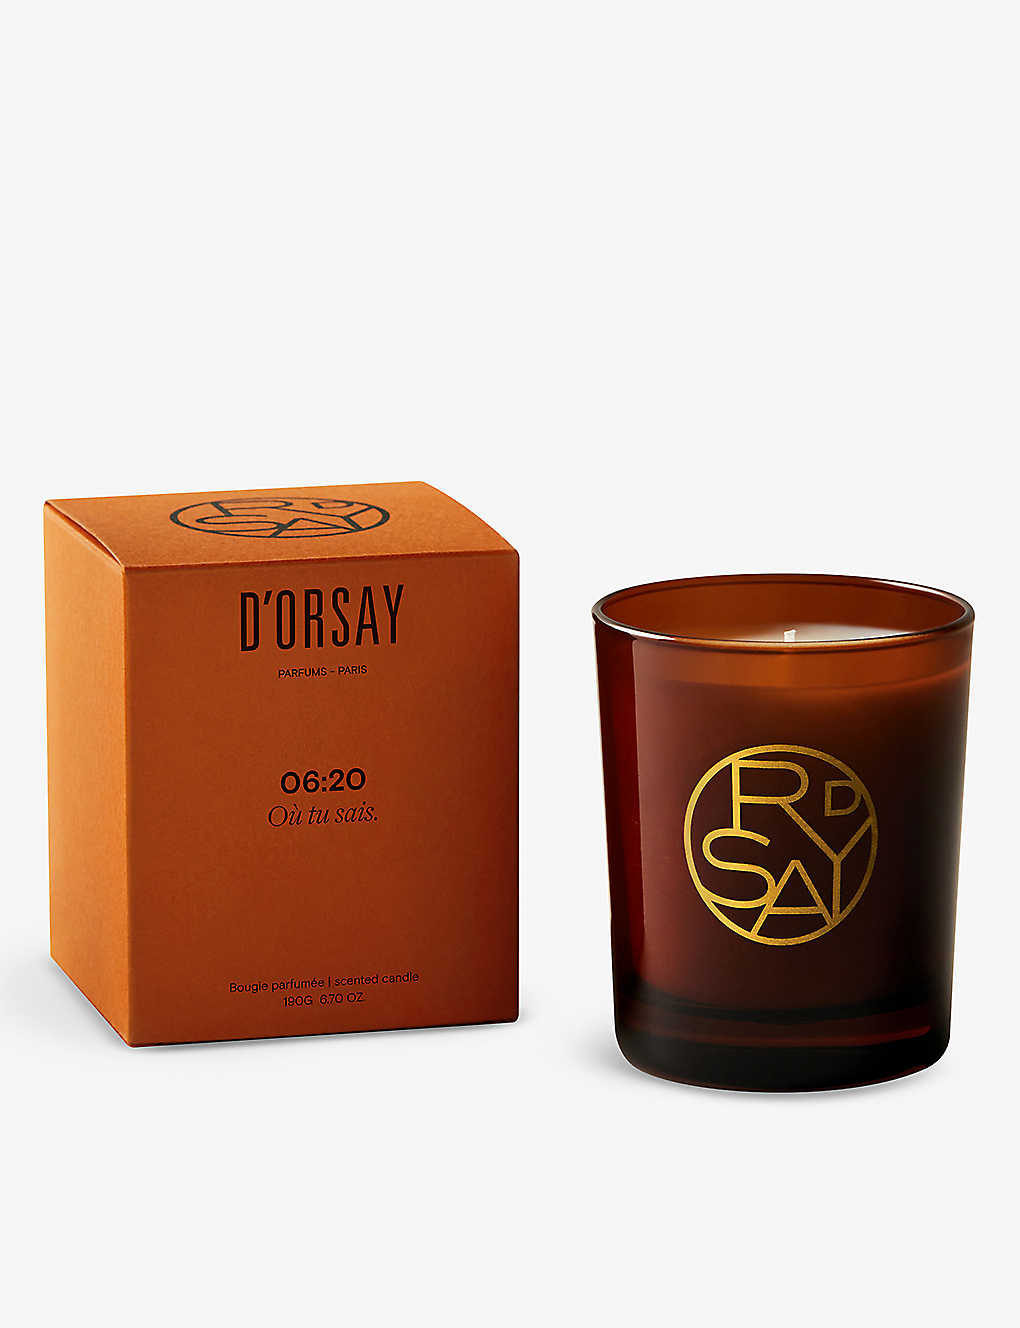 D'orsay 06:20 Scented Candle 190g